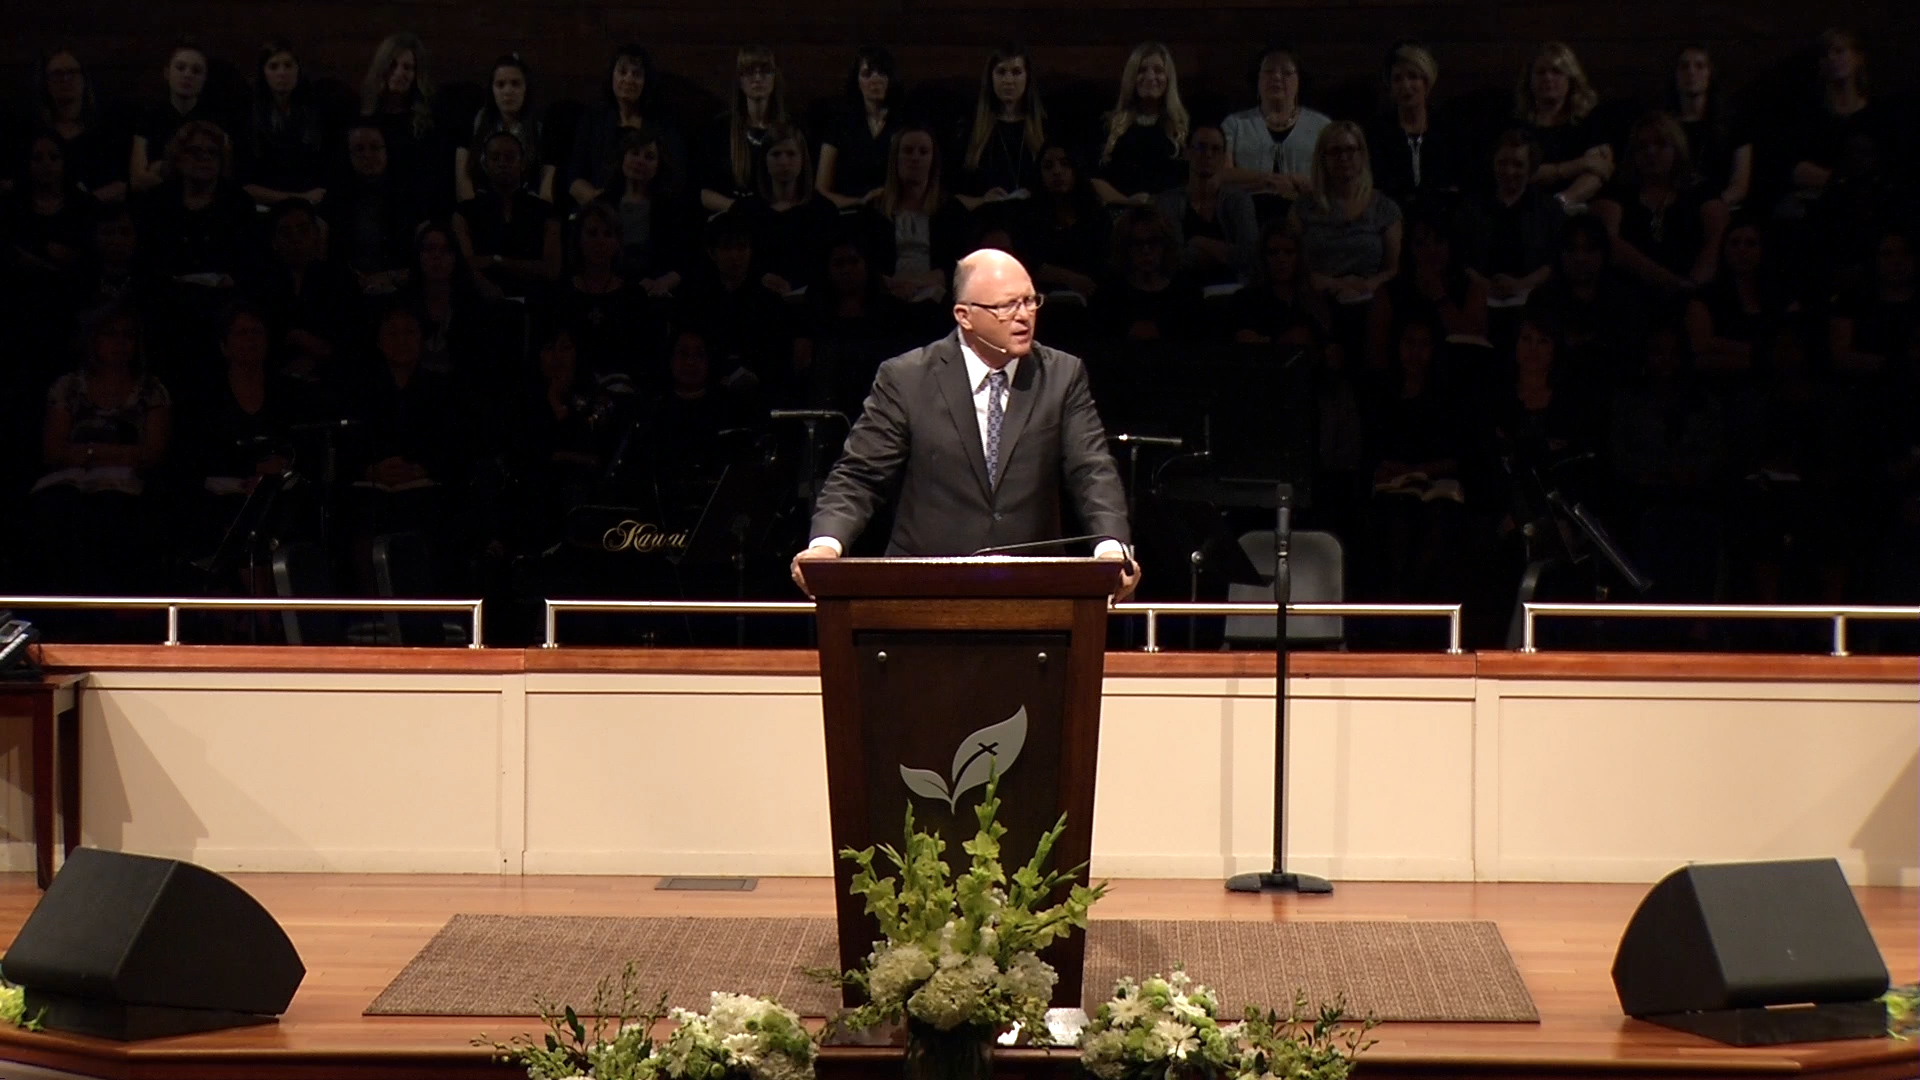 Pastor Paul Chappell: Declaring Truth in an Unbelieving Culture